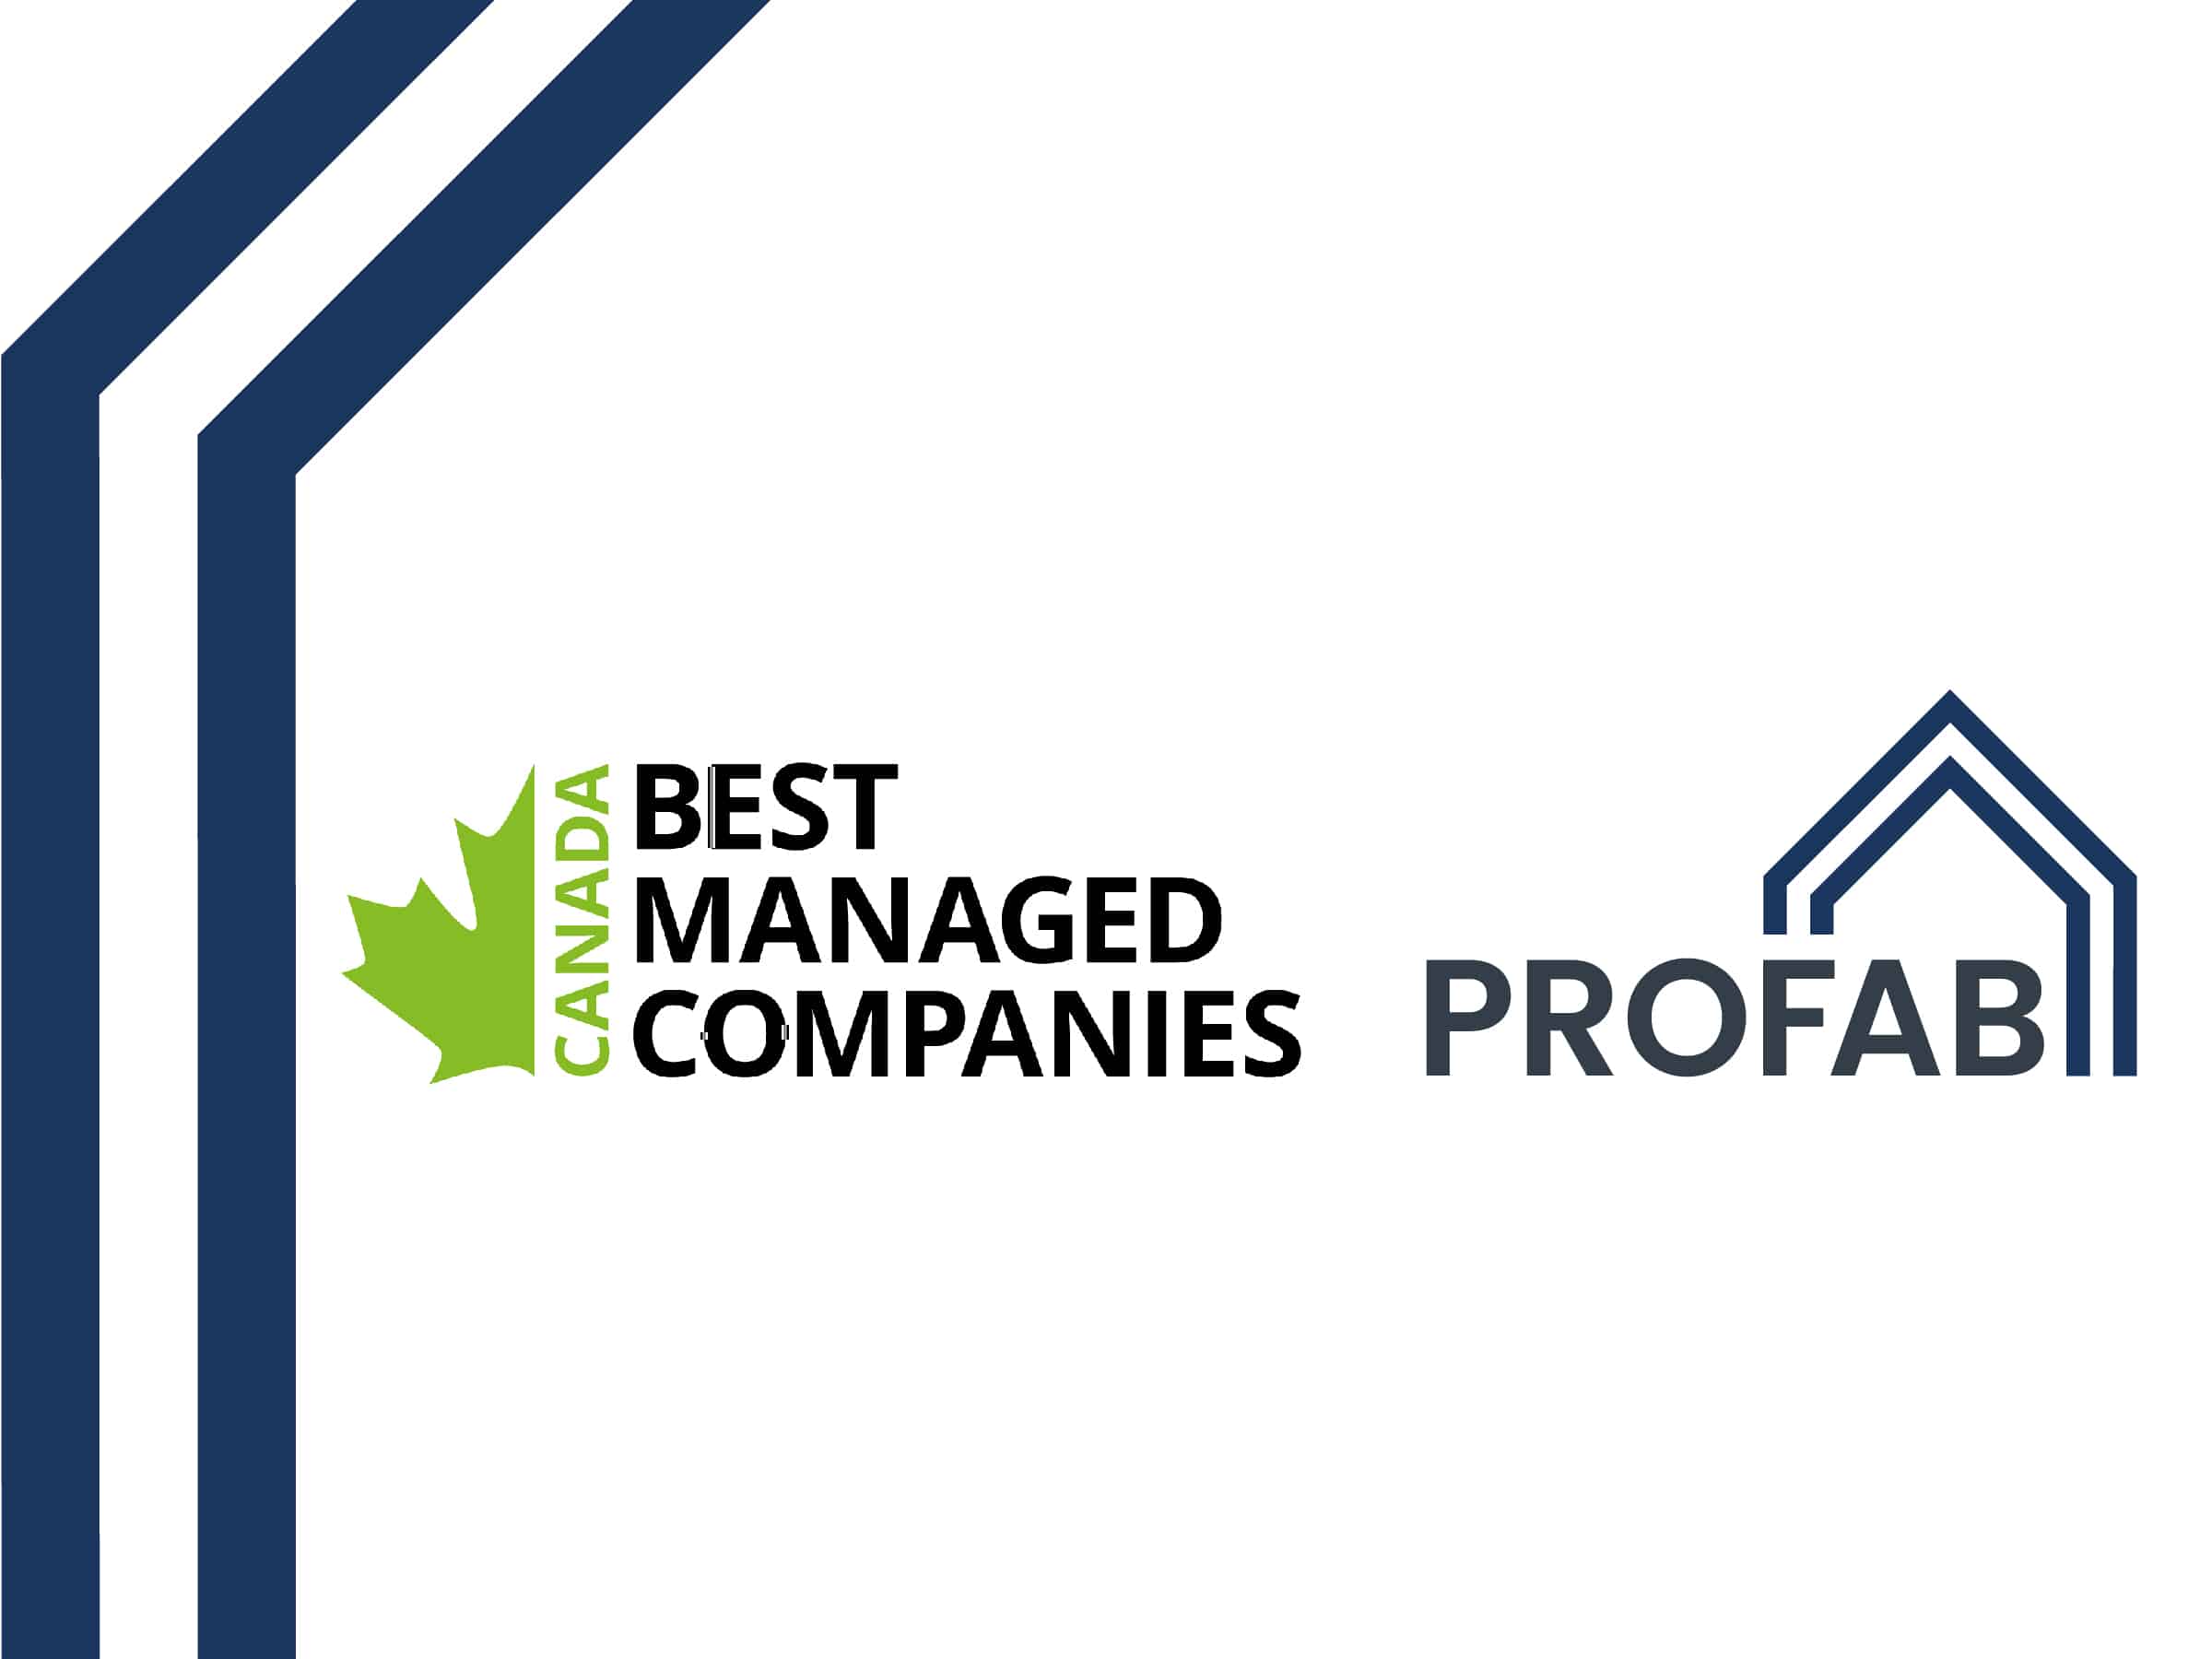 Best Managed Companies logo and Profab logo